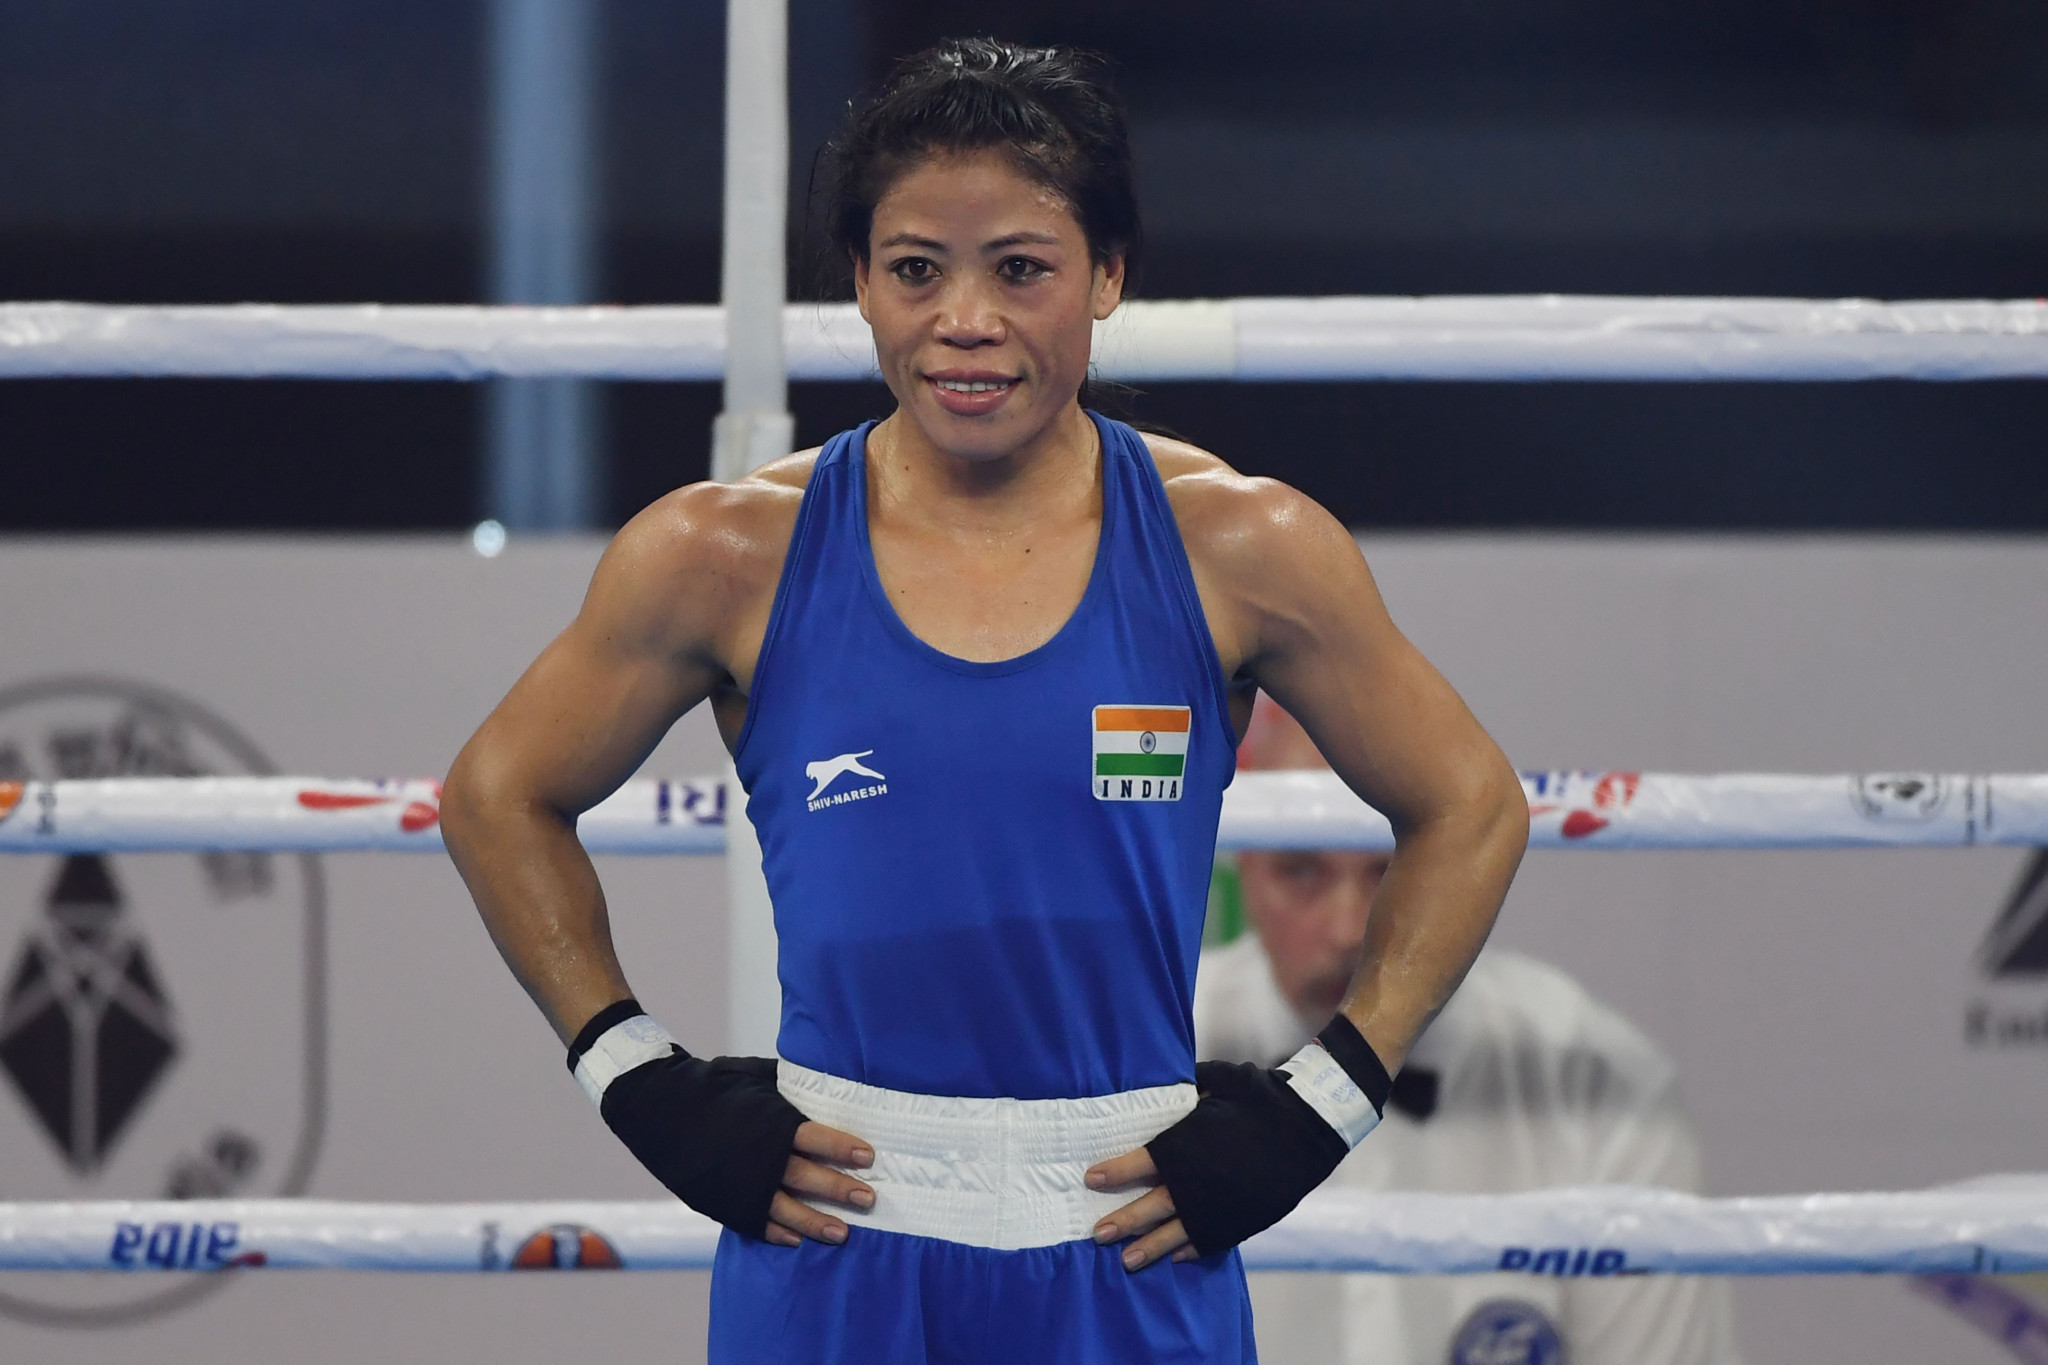 London 2012 Olympic bronze medallist boxer Mary Kom is chairing Committees created by the IOA and Ministry of Sport to investigate allegations at the WFI ©Getty Images